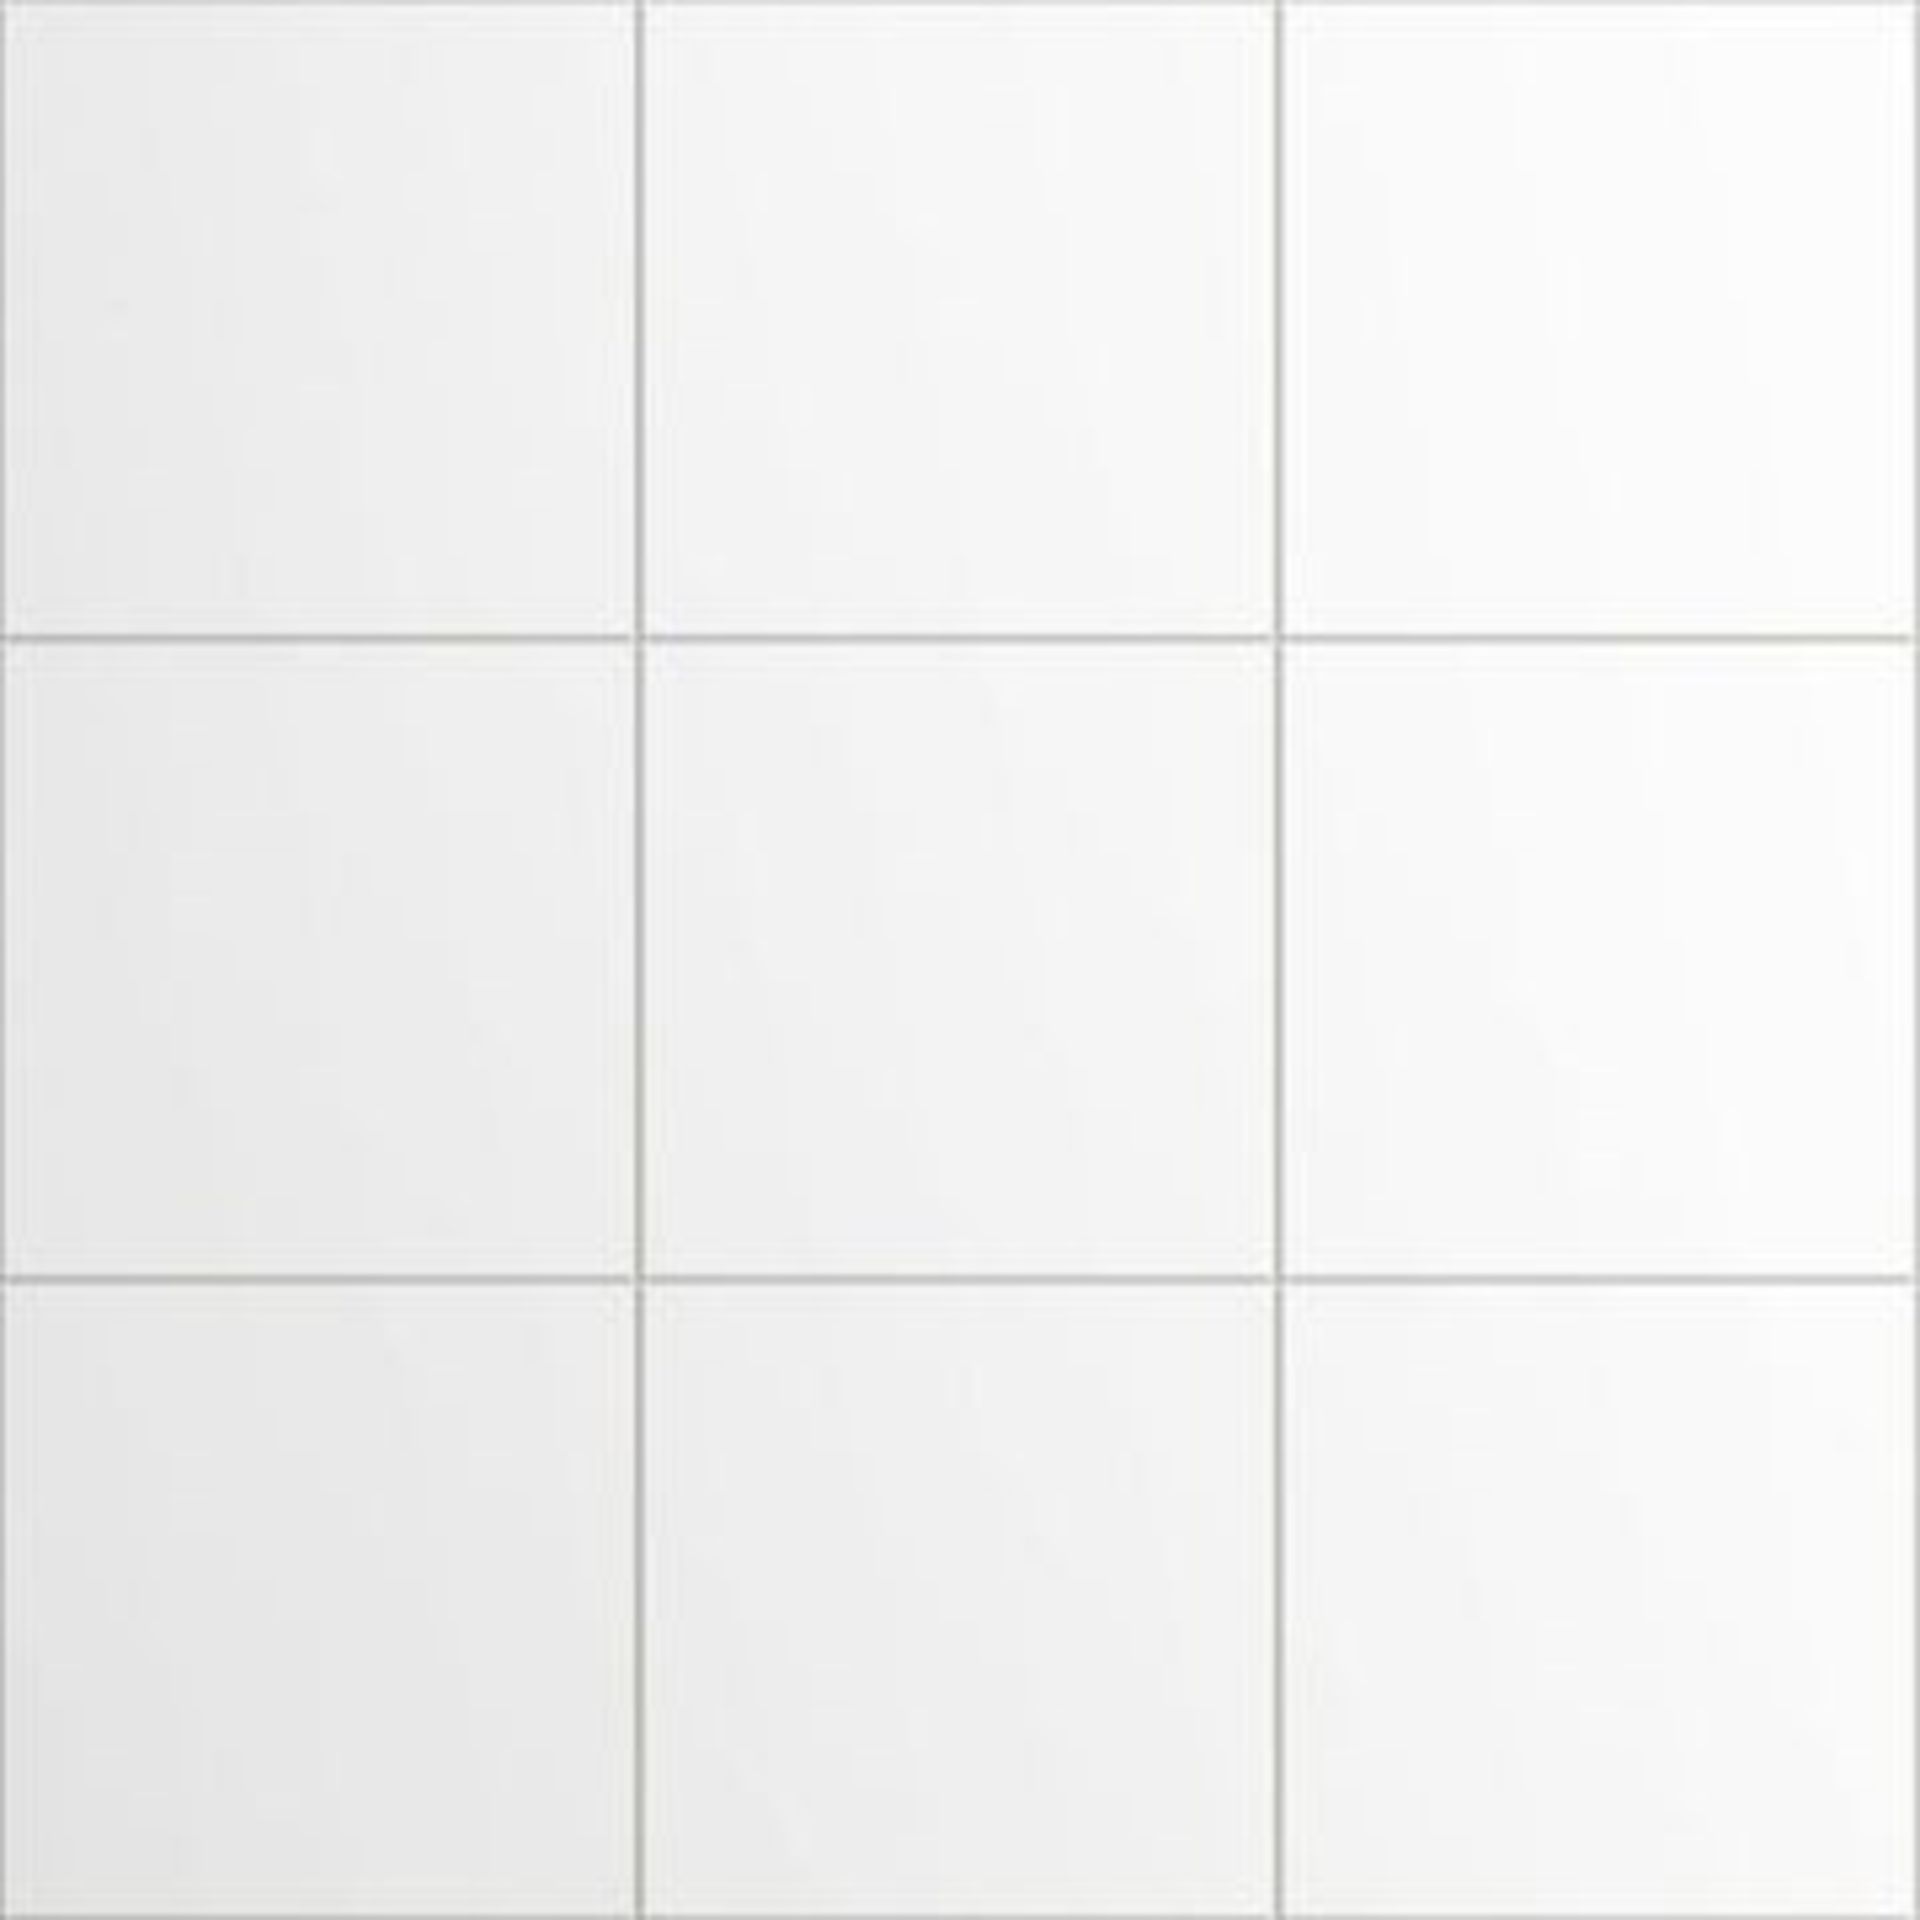 6m2 150x150mm White Square Porcelain Wall Tiles. White tiles are an essential product that is ... - Image 3 of 3